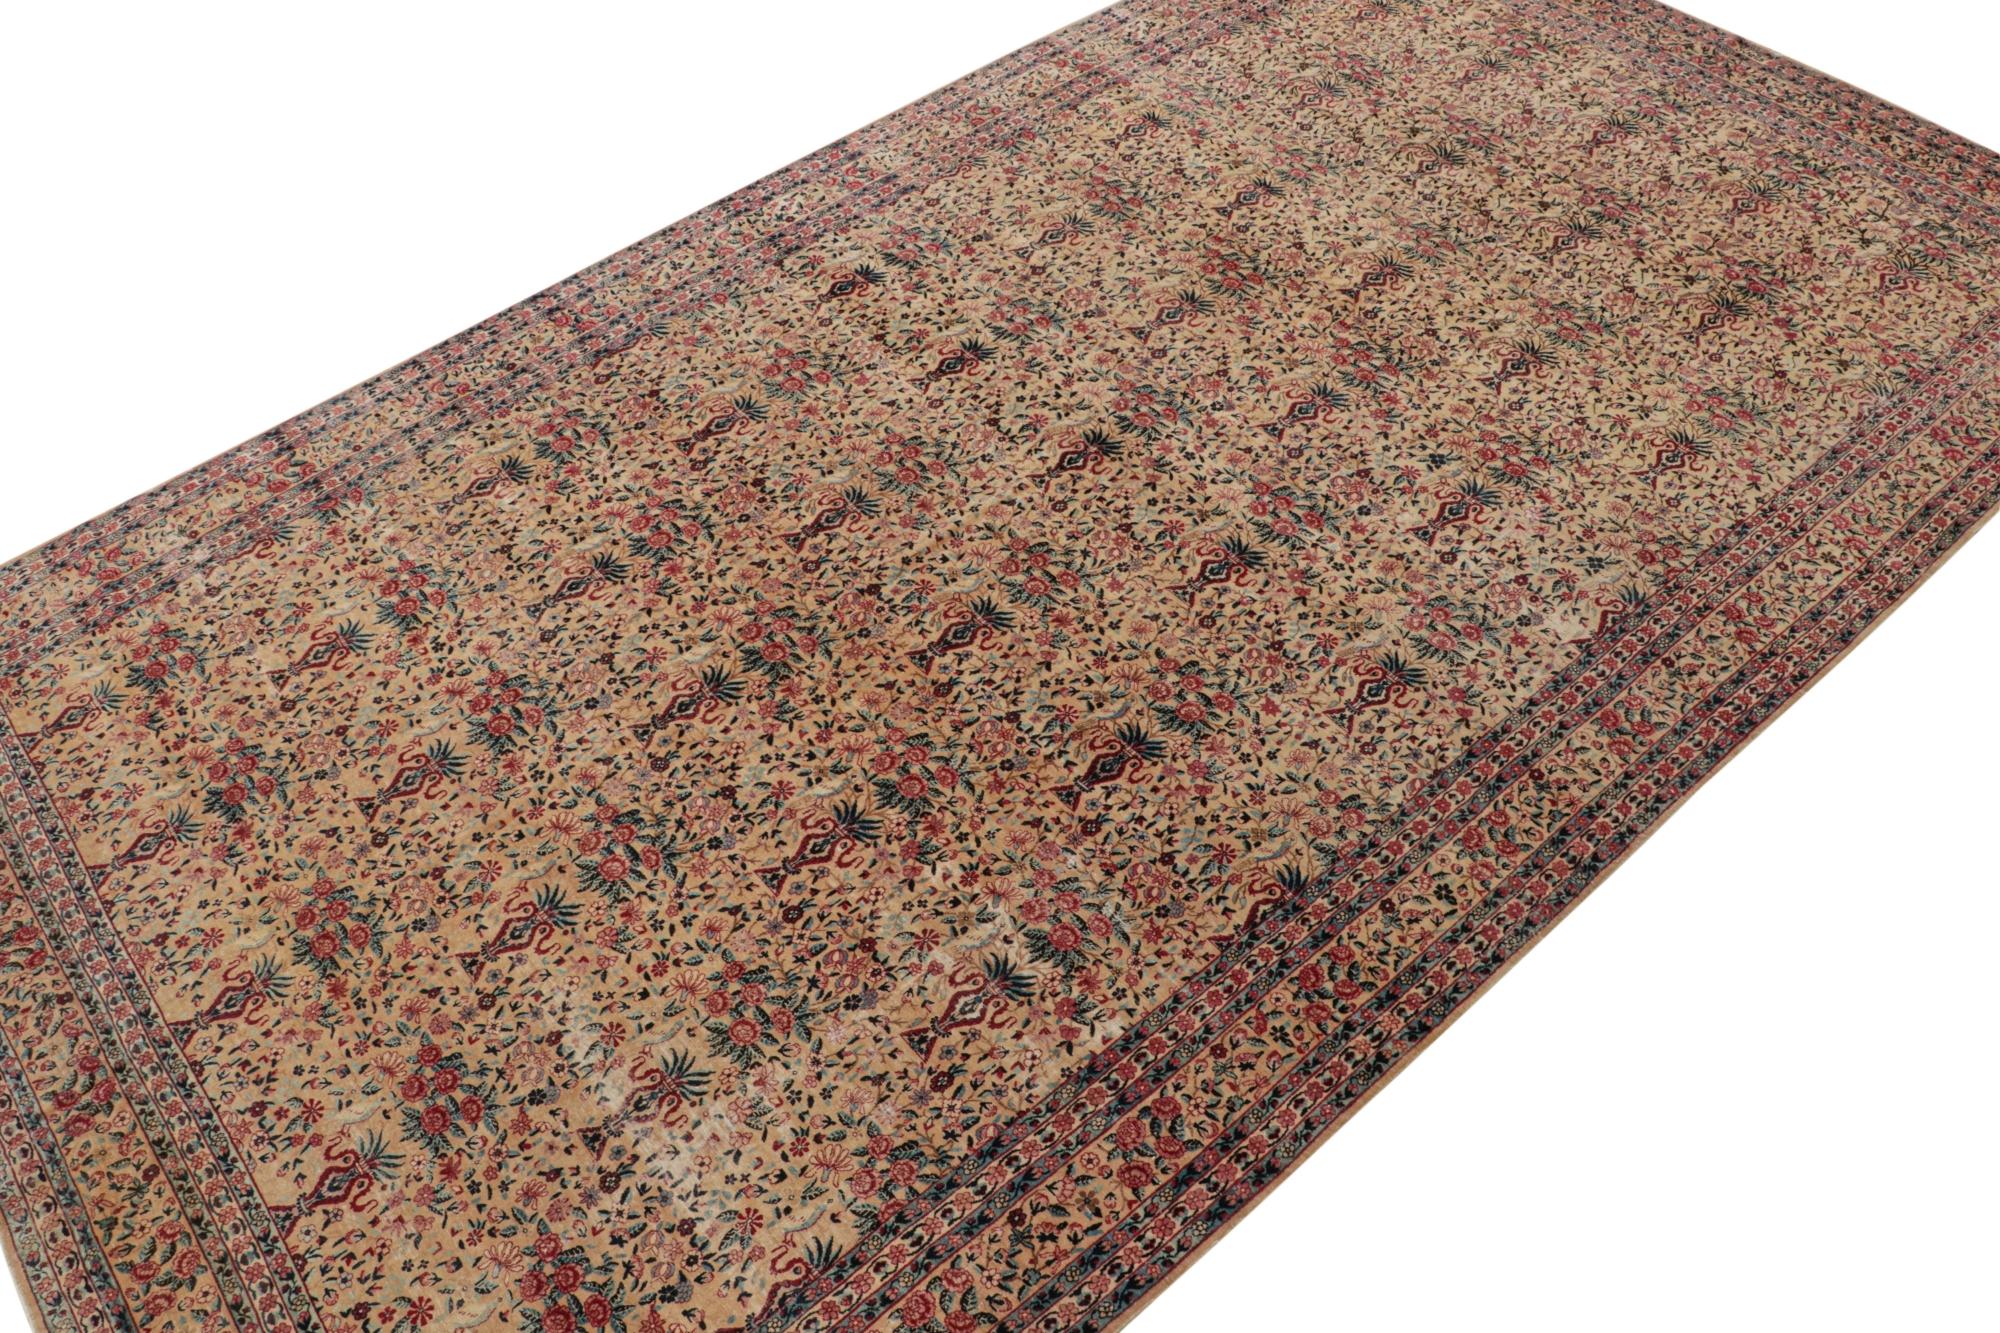 Rare Antique Kerman Lavar Persian Rug with Floral Patterns, from Rug & Kilim In Good Condition For Sale In Long Island City, NY